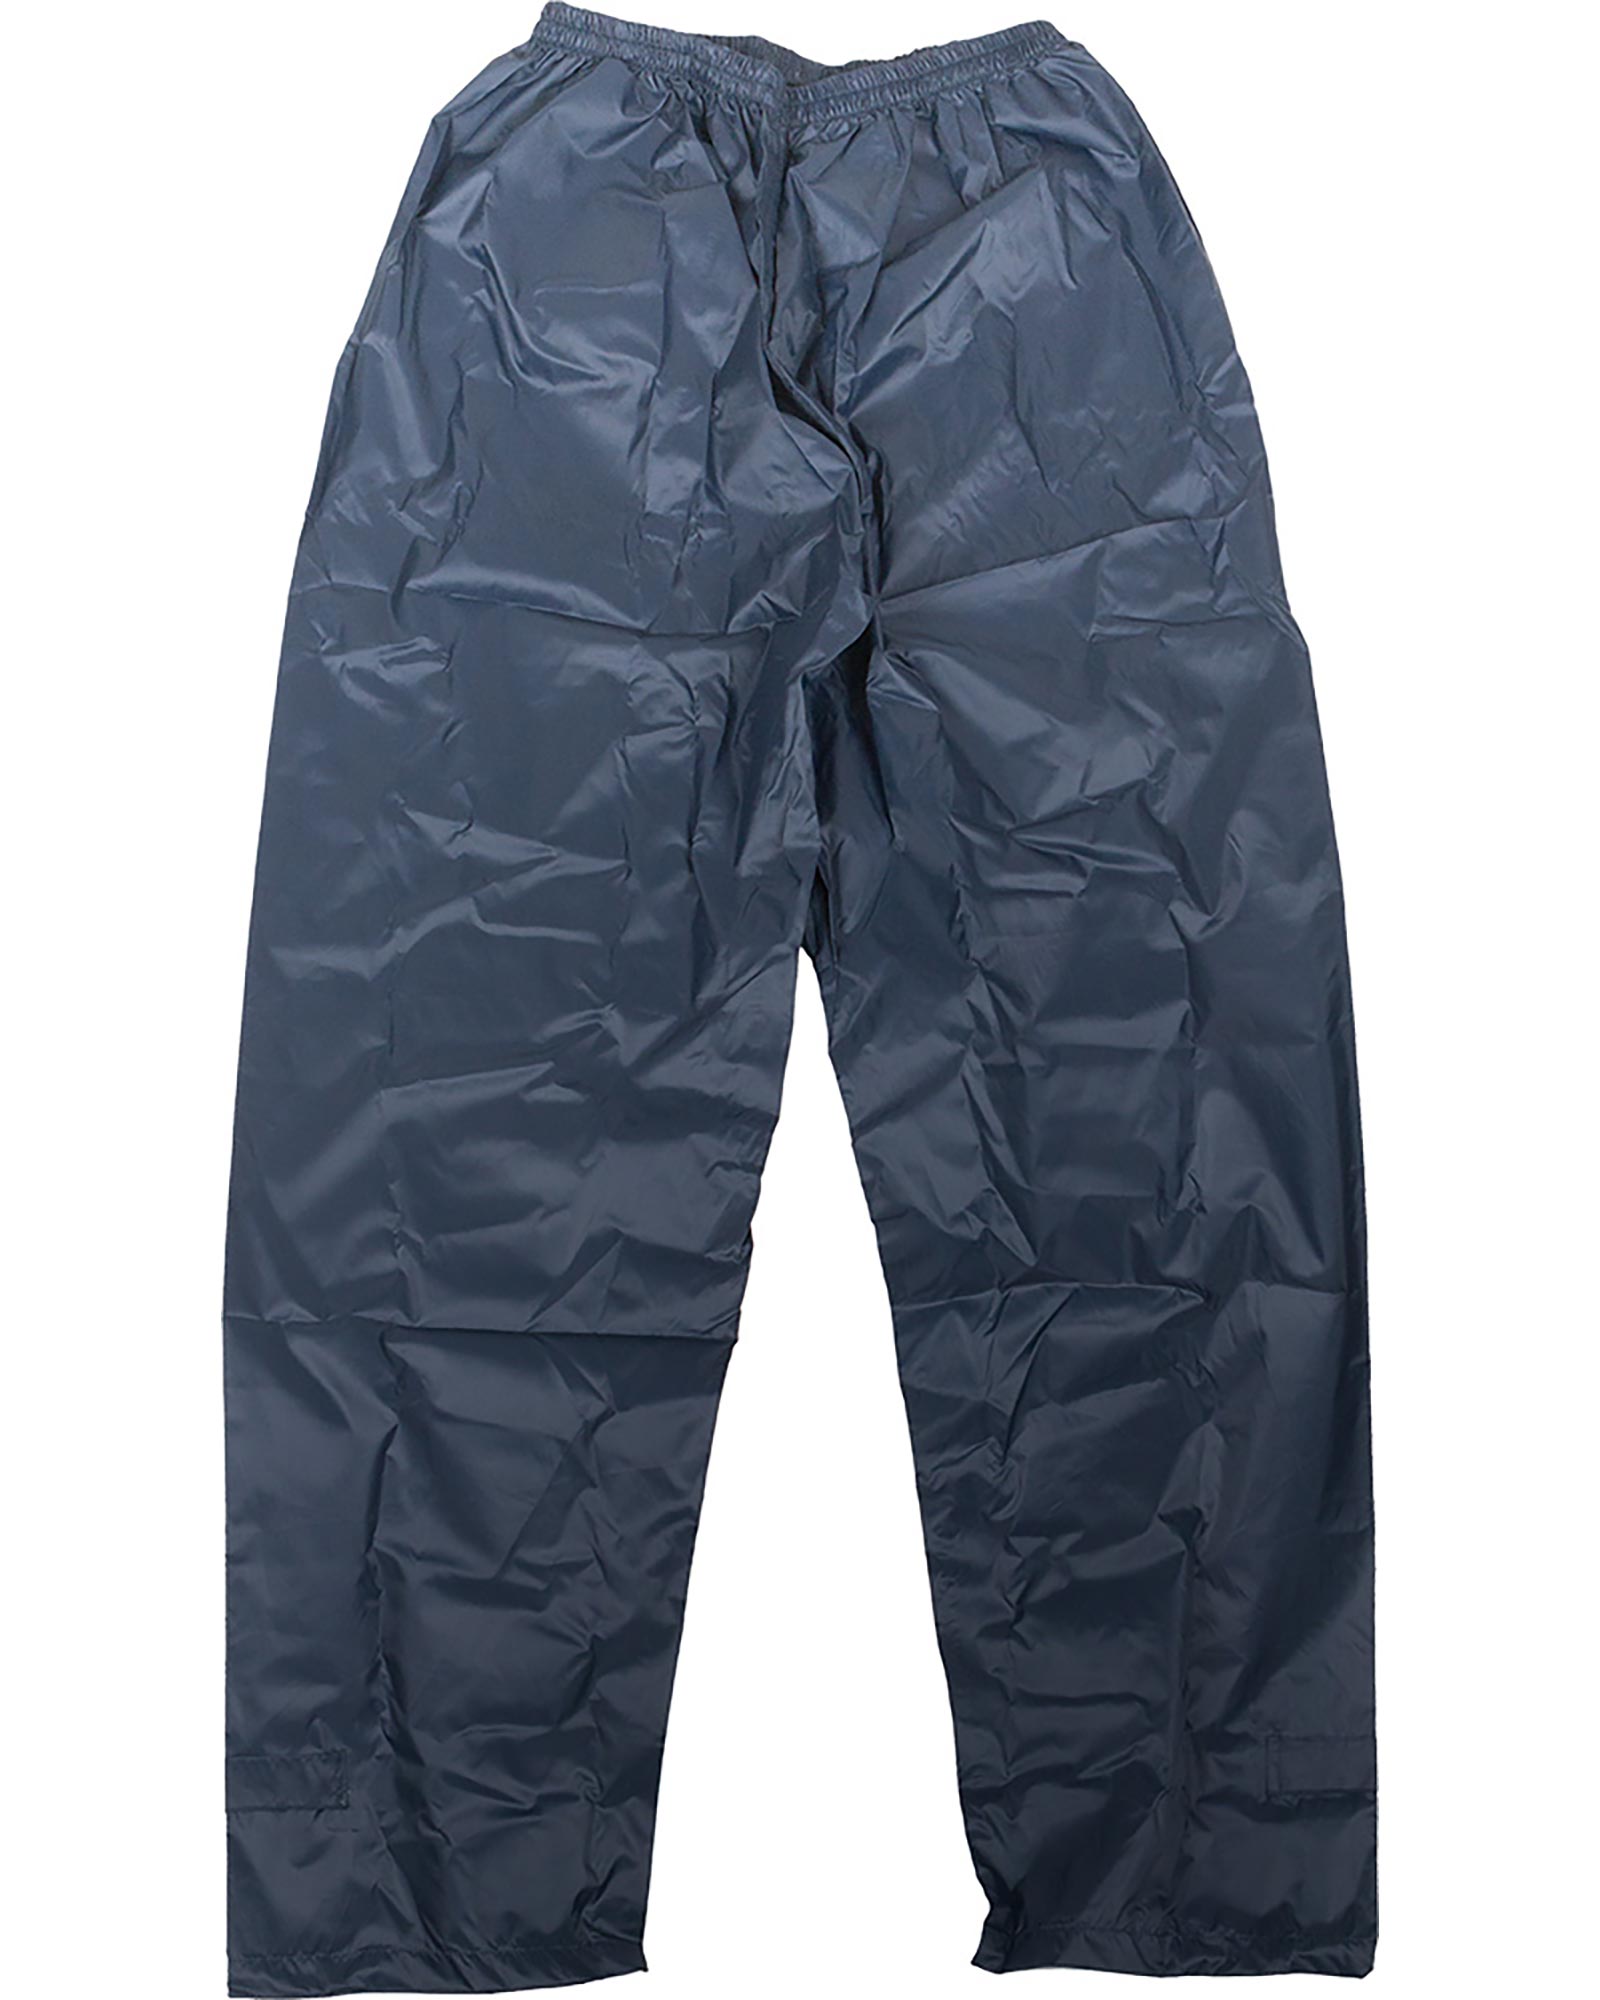 Target Dry Mac in a Sac Adult Packable Waterproof Overtrousers - Navy XL